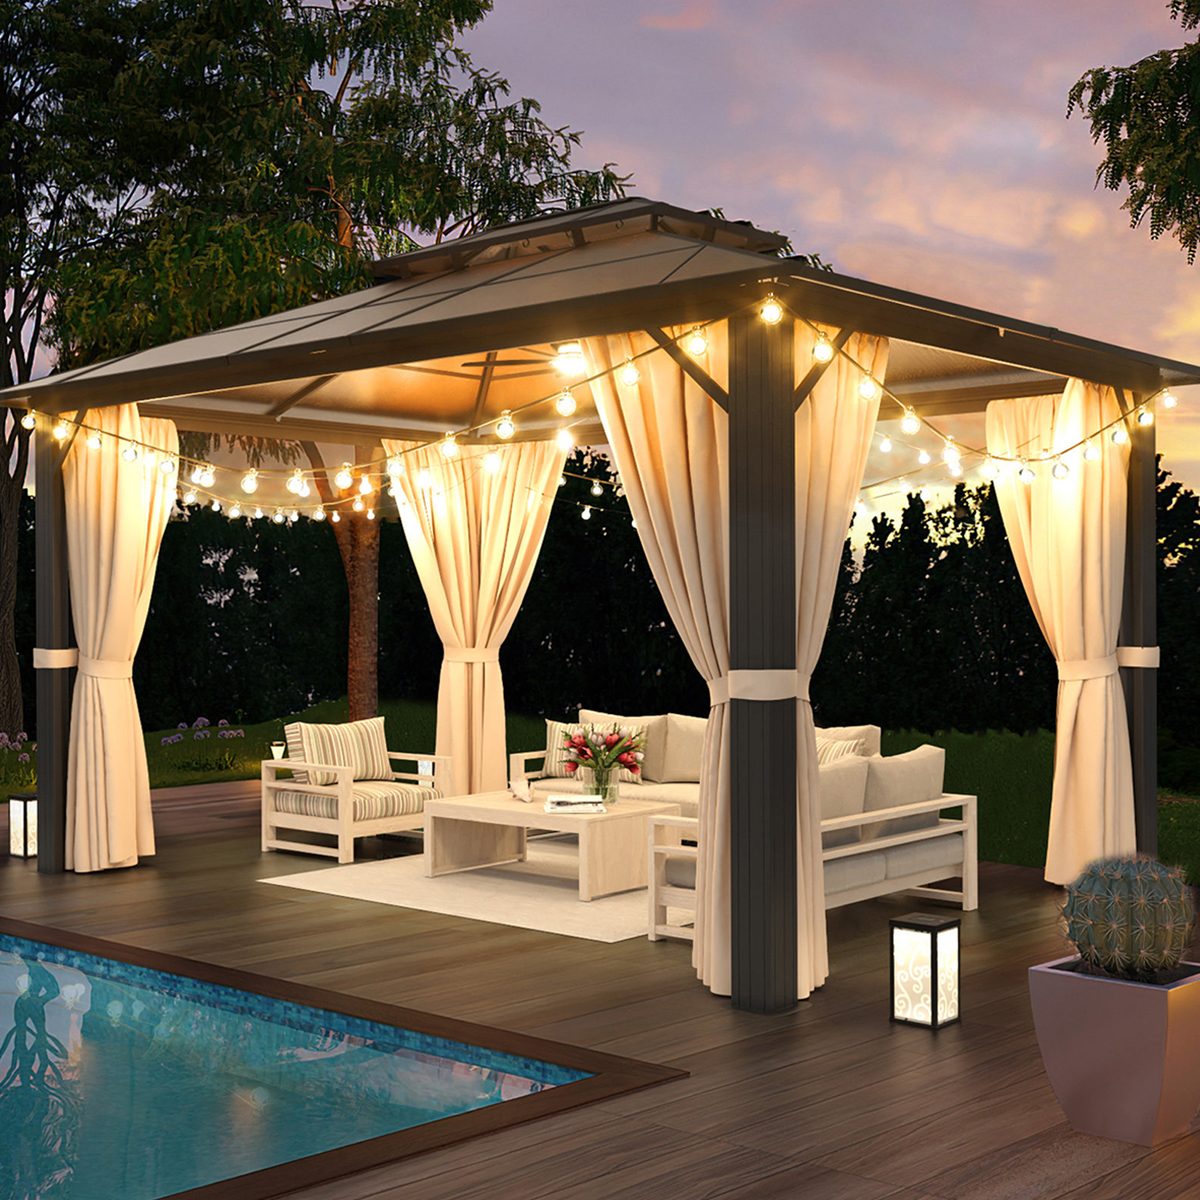 8 Cozy And Protected Hot Tub Shelter Ideas To Consider This Summer